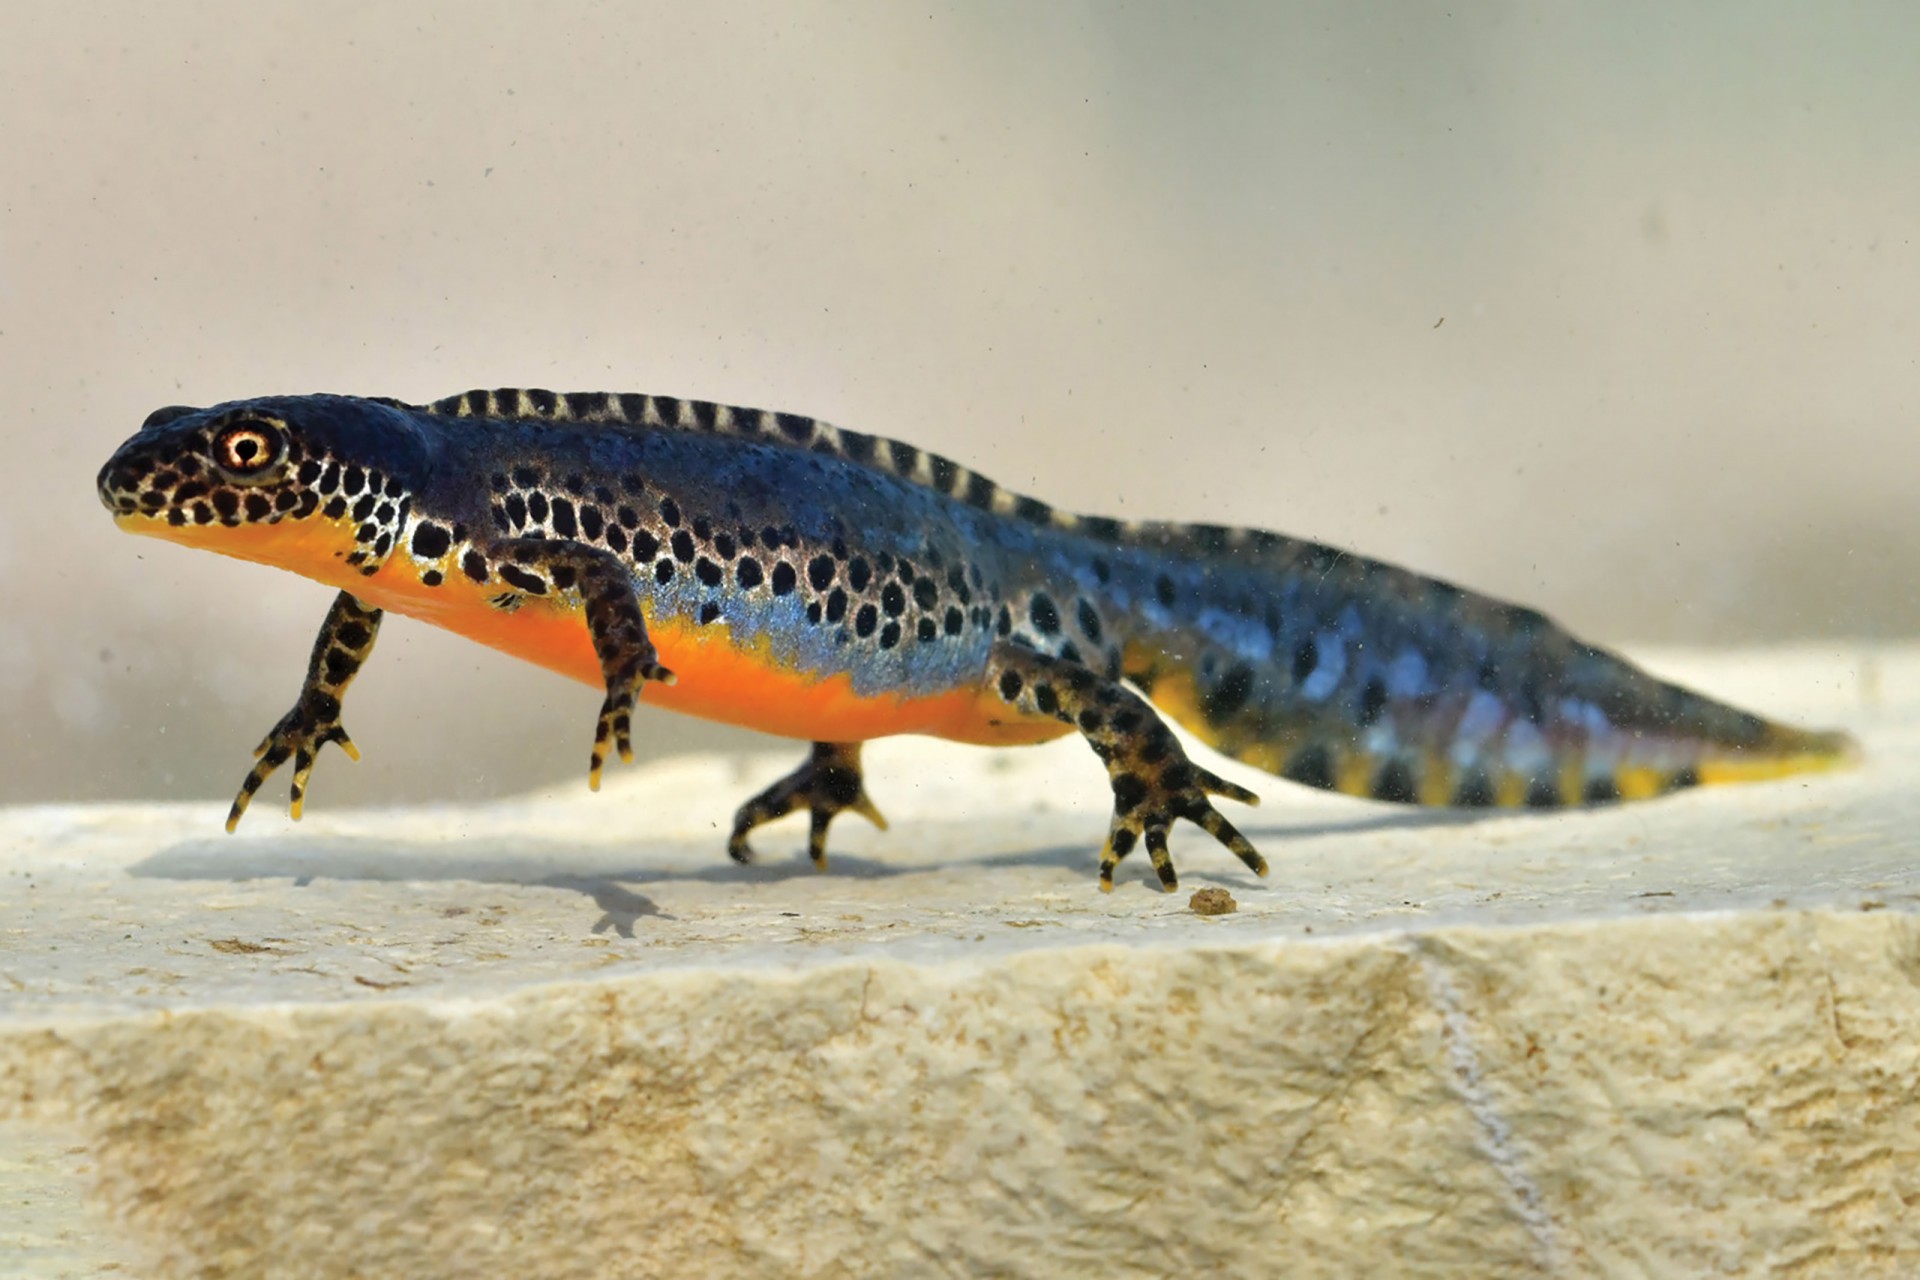 Ichthyosaura alpestris, The Alpine newt inhabits forests in mountainous regions in Europe and Great Britain